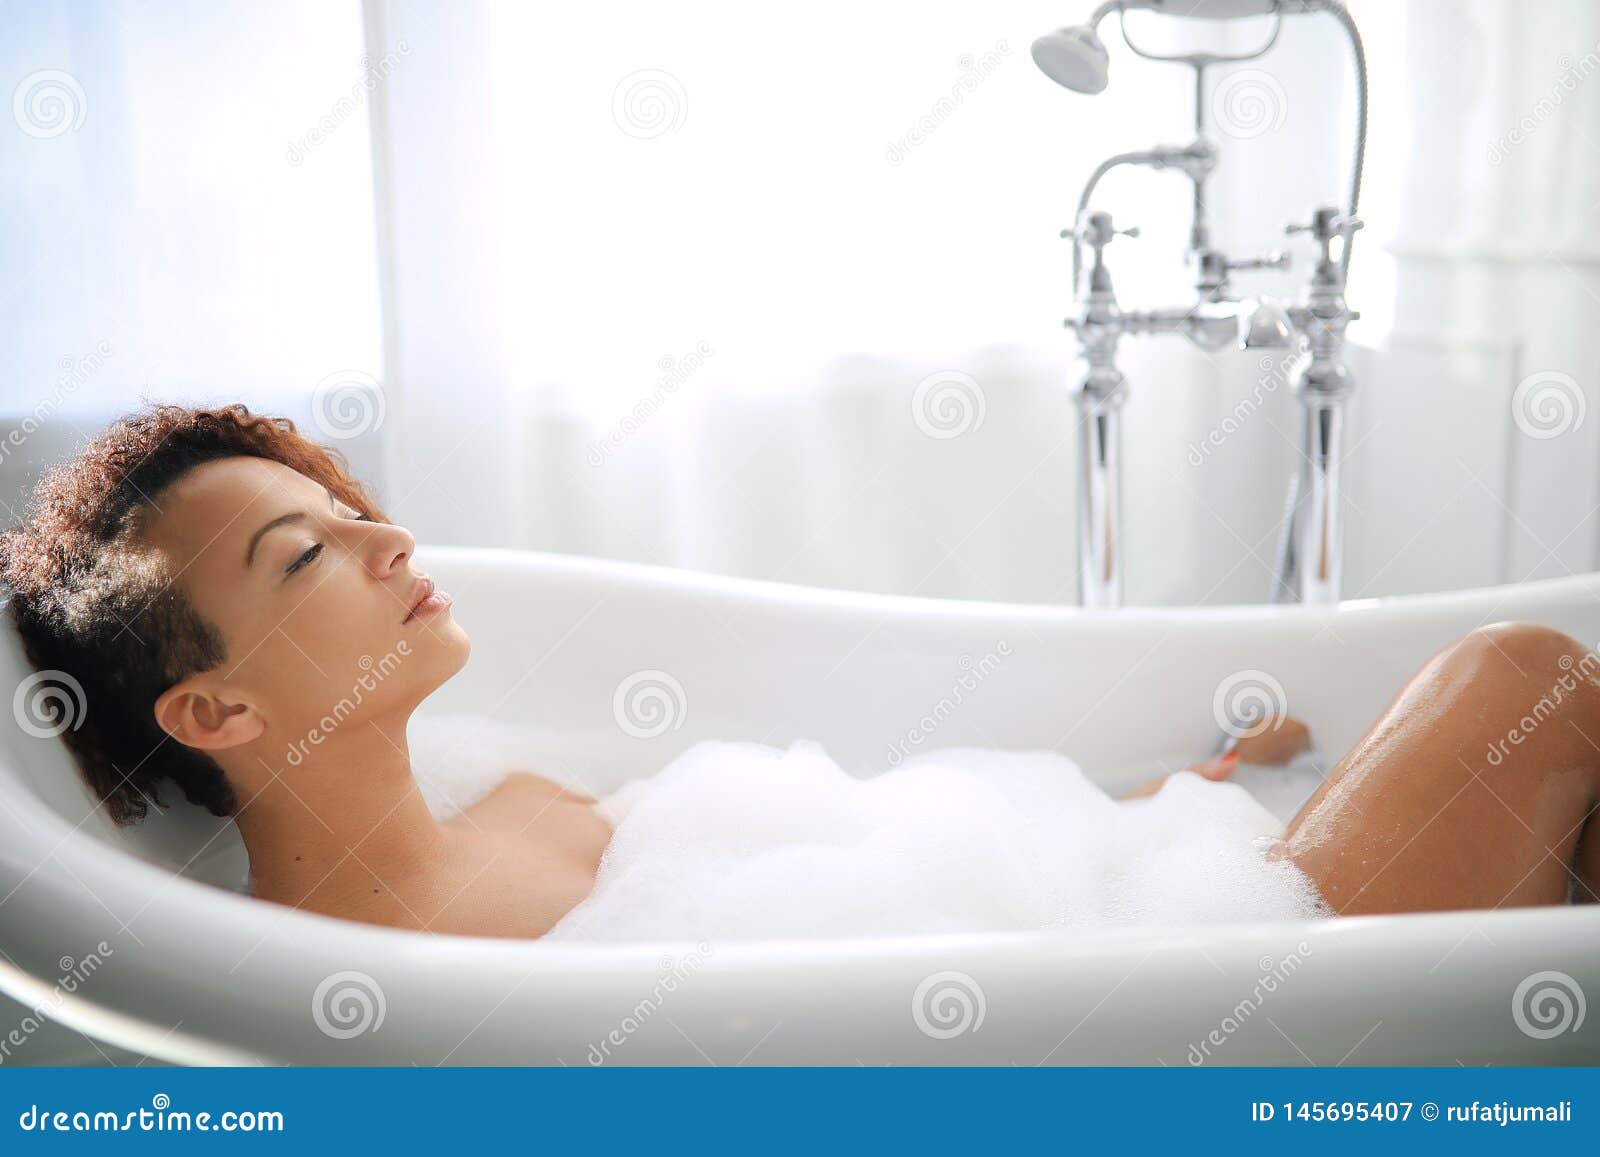 Girl In Bathtub Online Sale Up To 64 Off